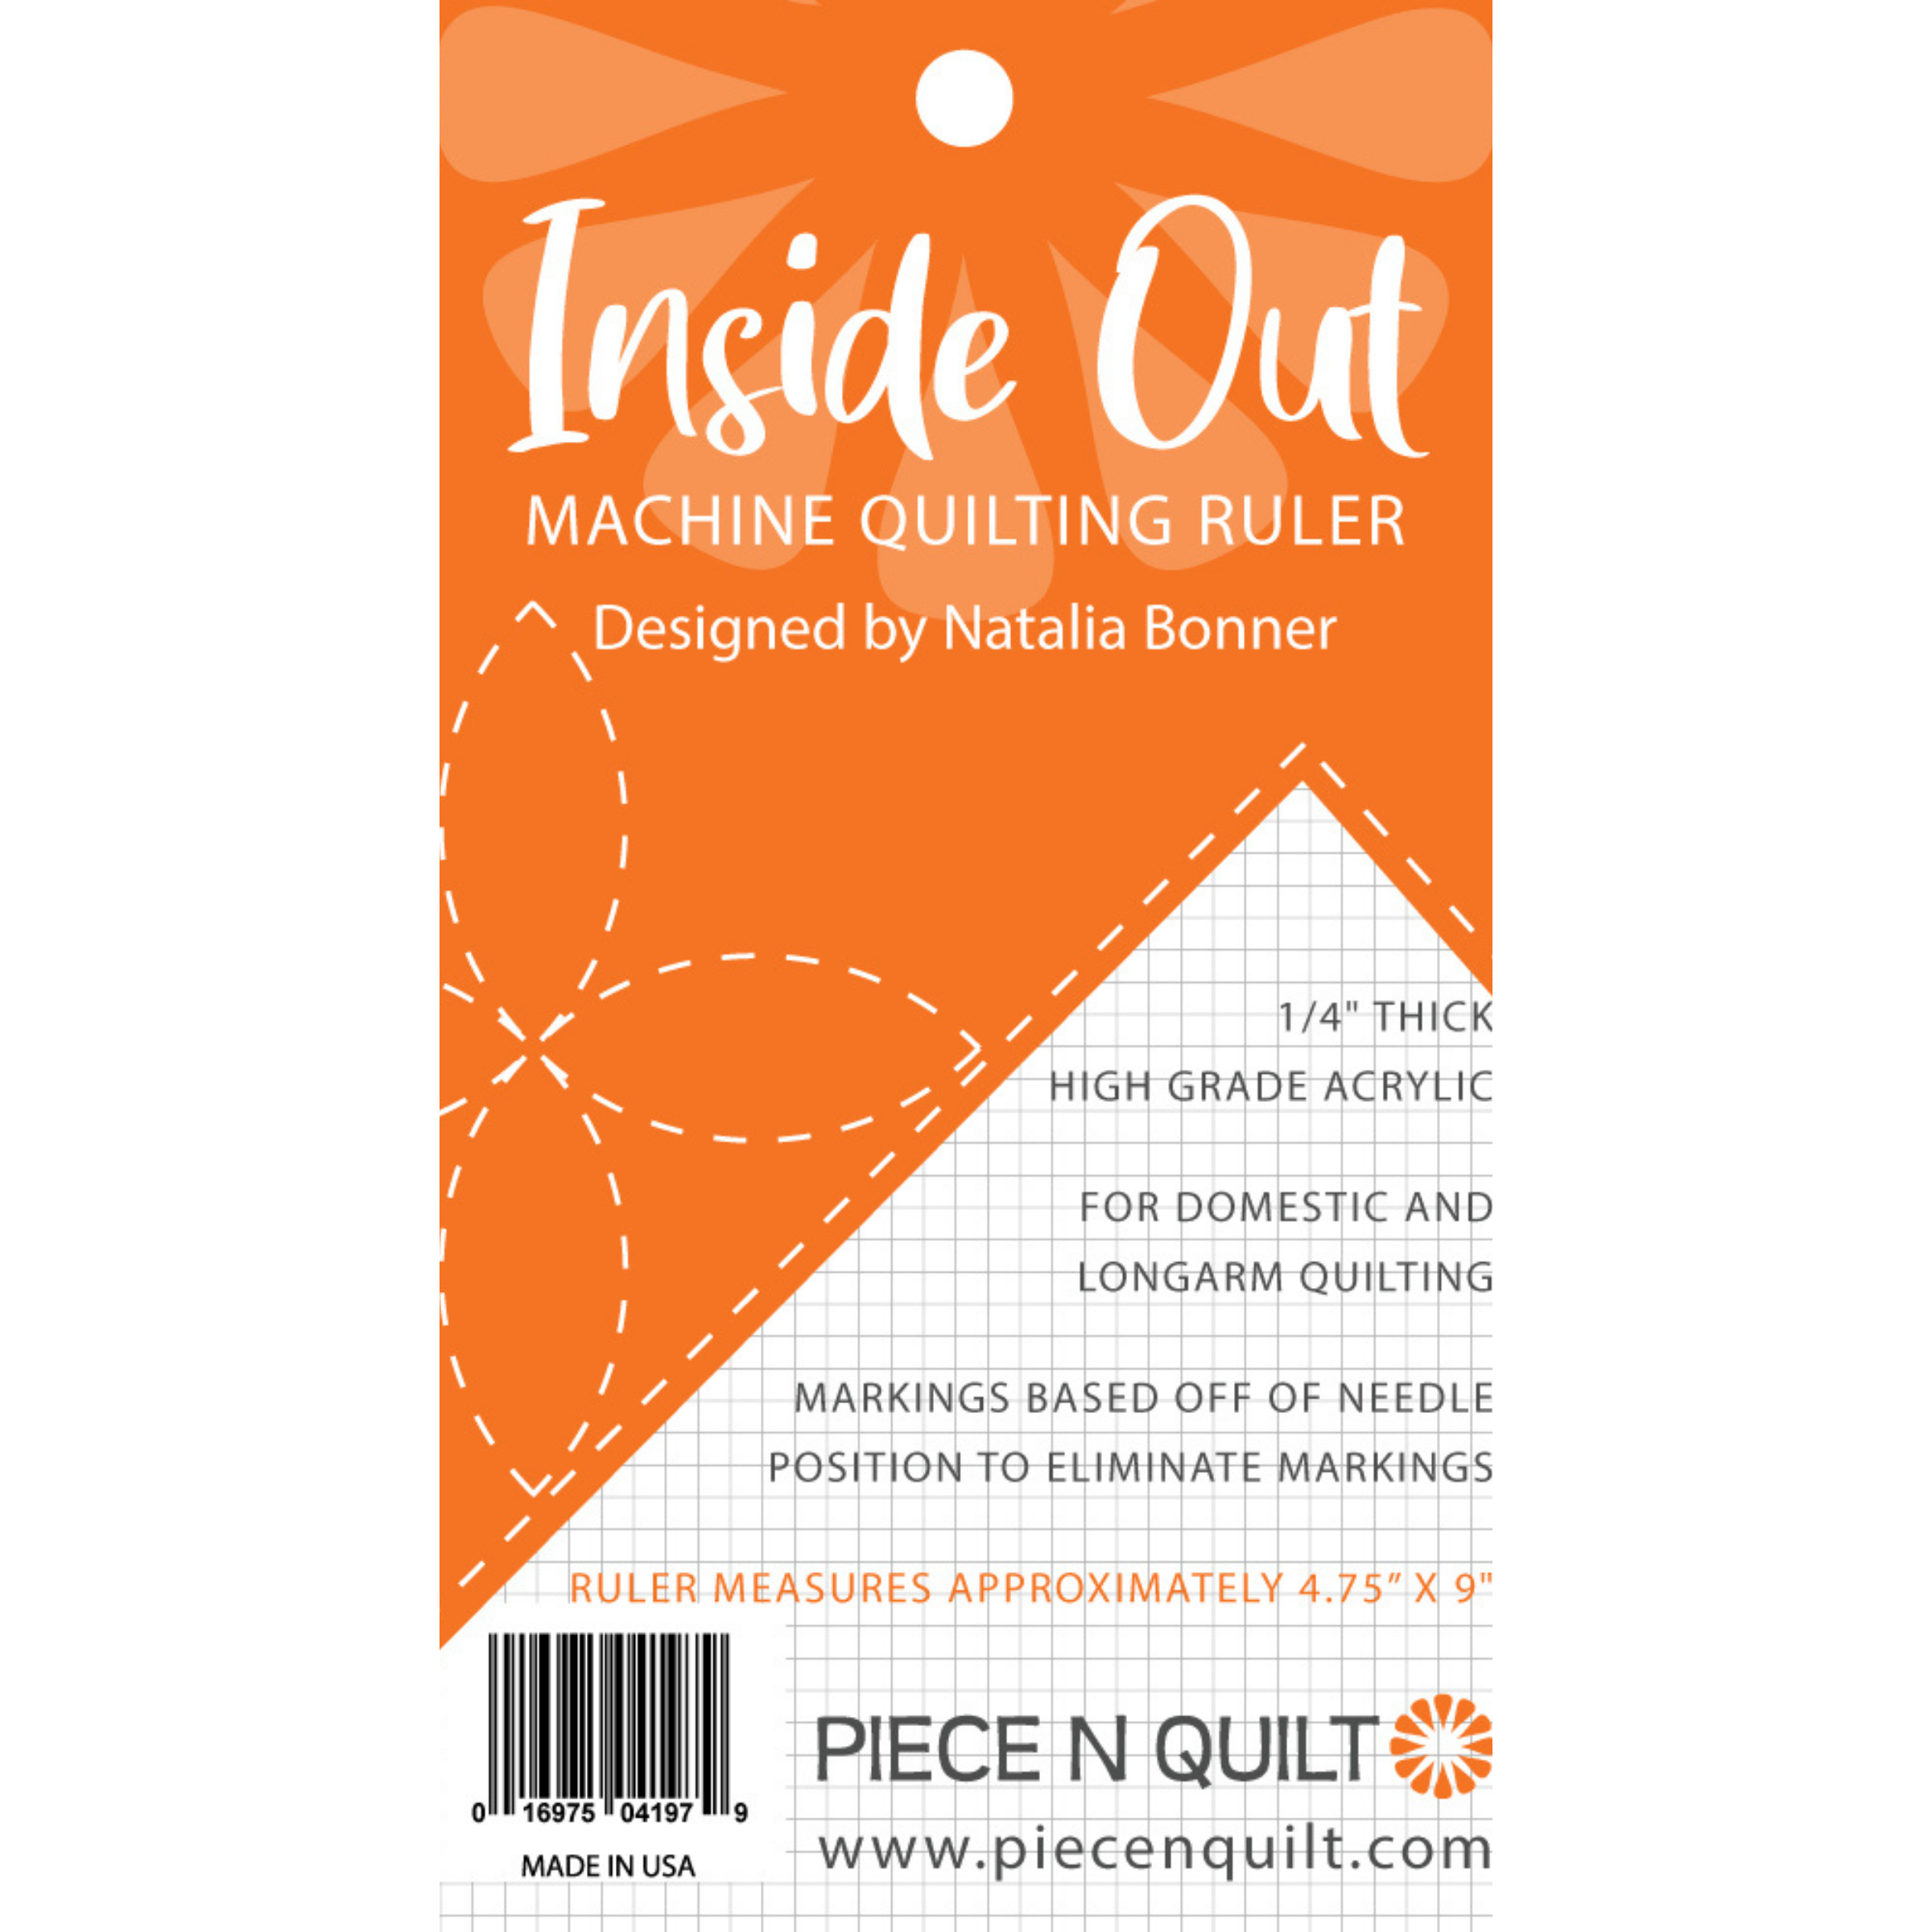 Inside Out Quilting Ruler – Piece N Quilt